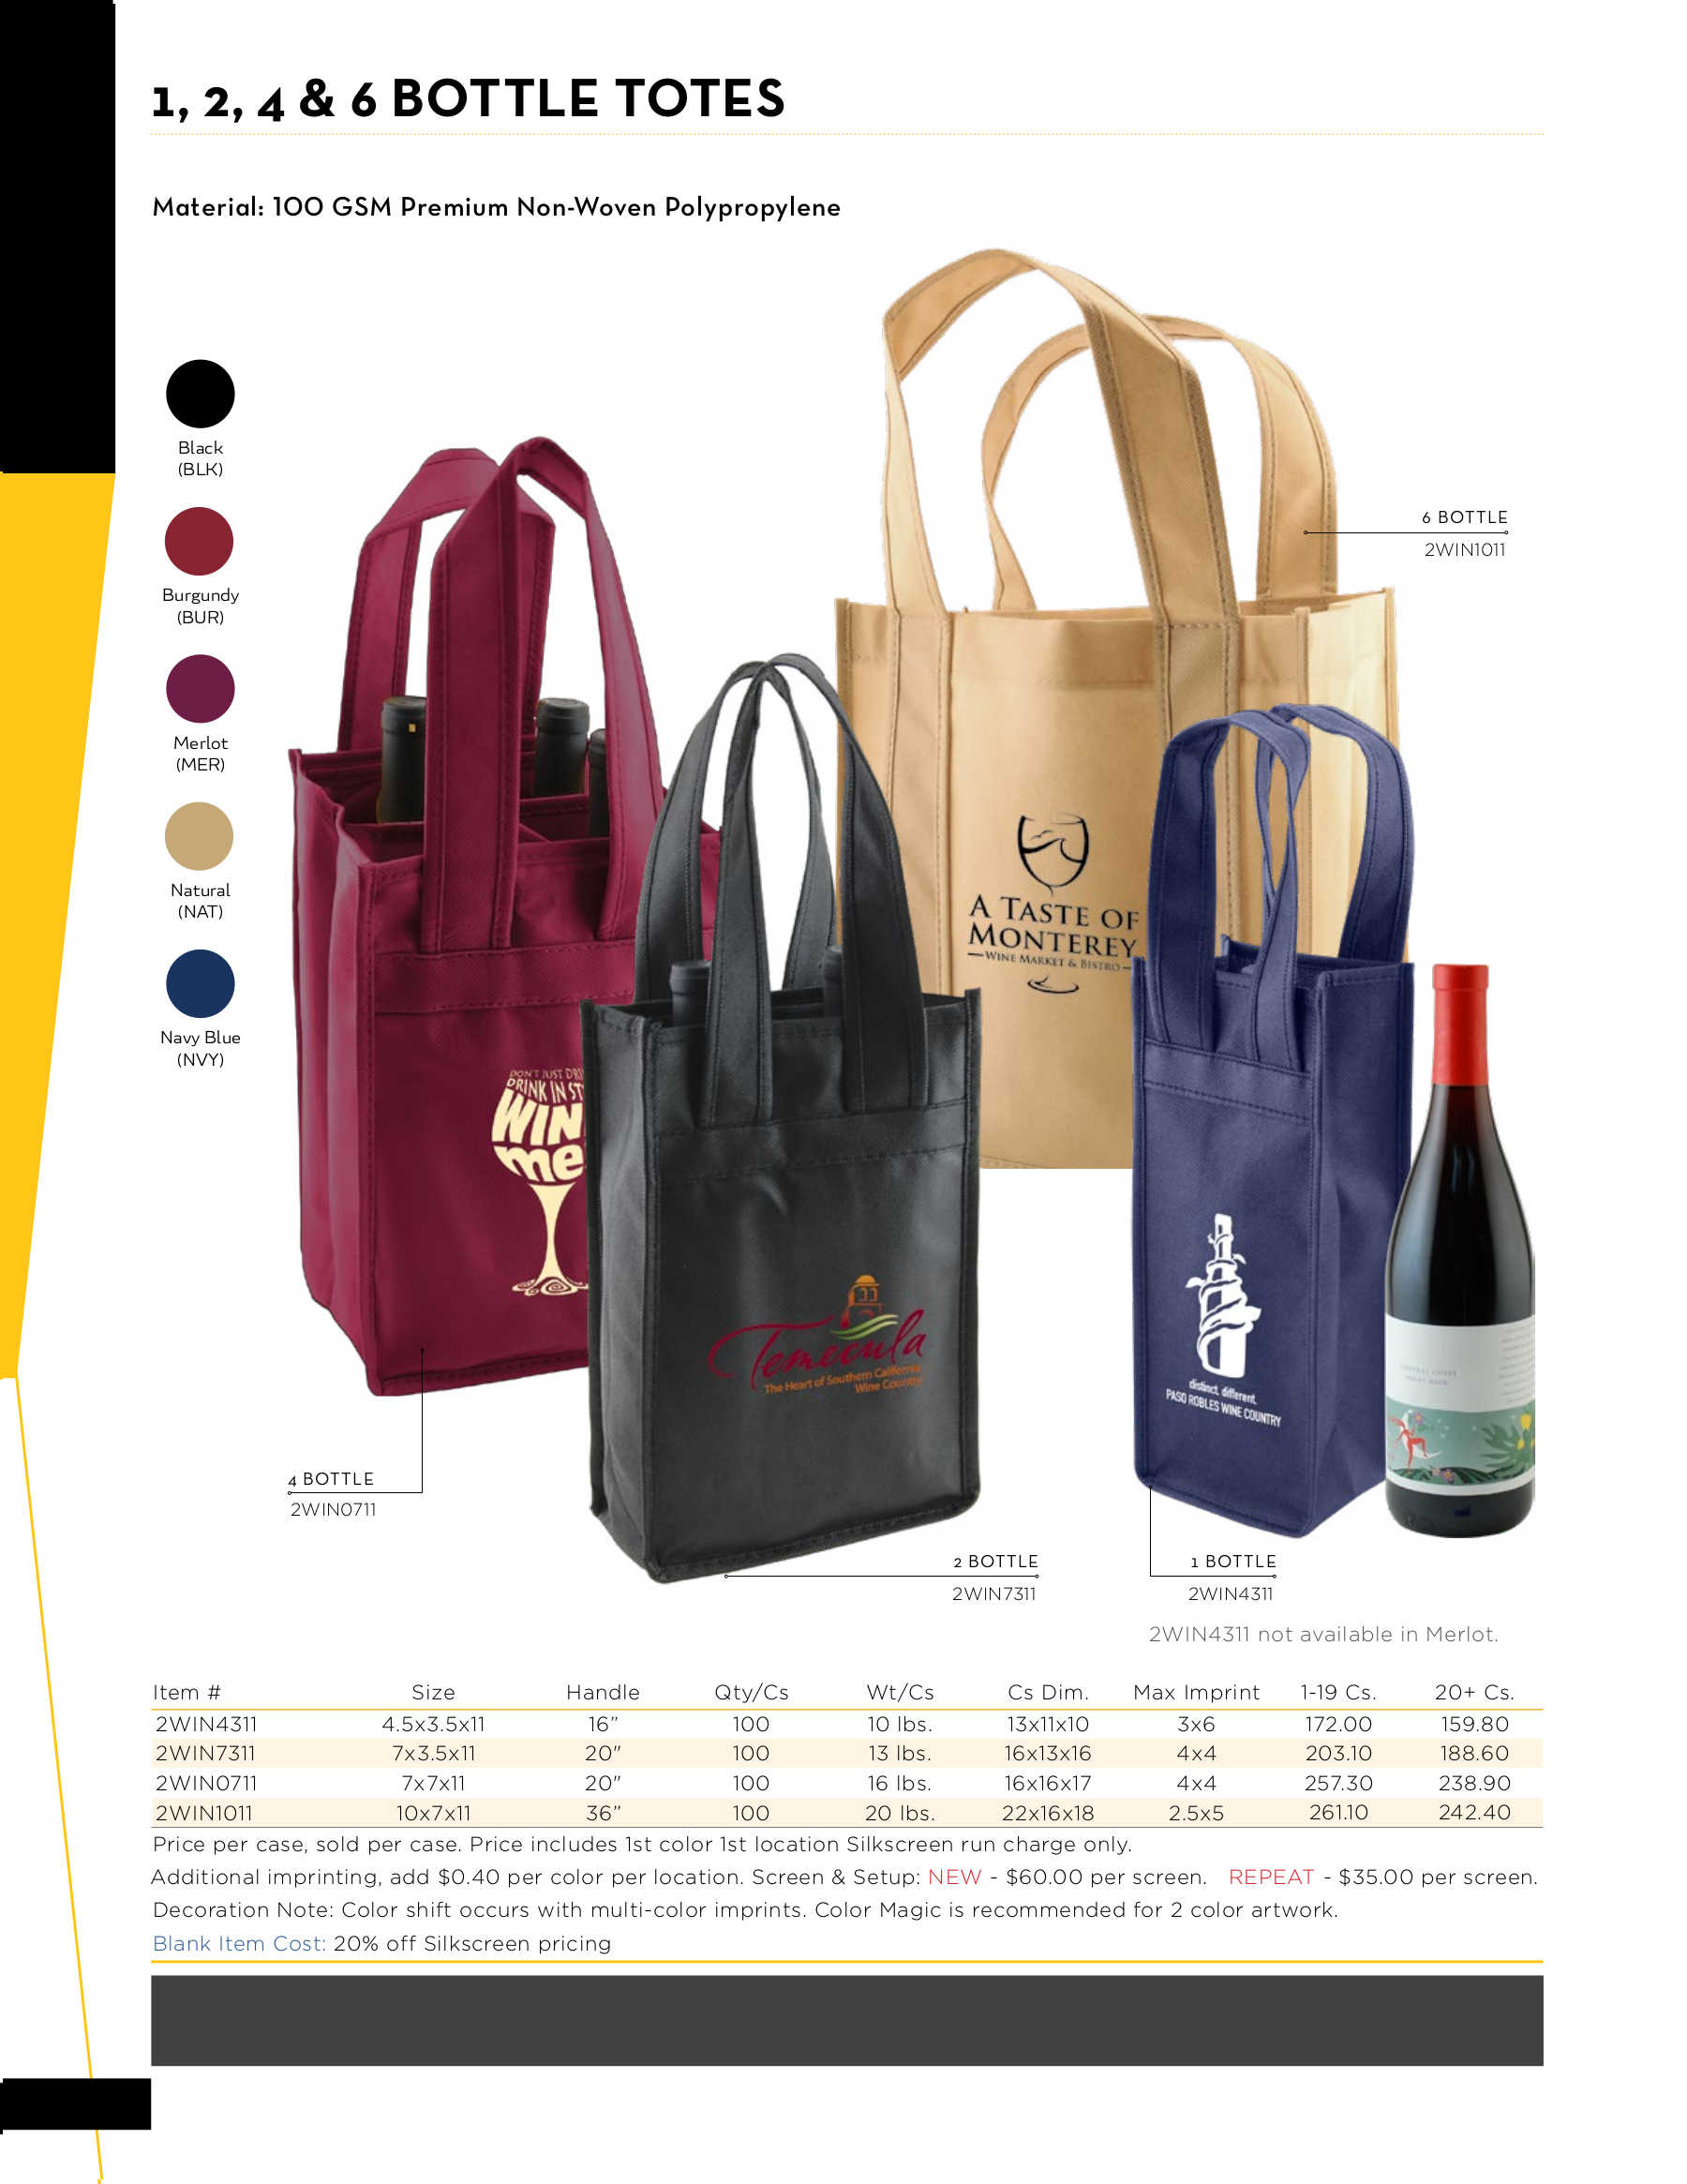 1, 2, 4 and 6 Bottle Wine Totes